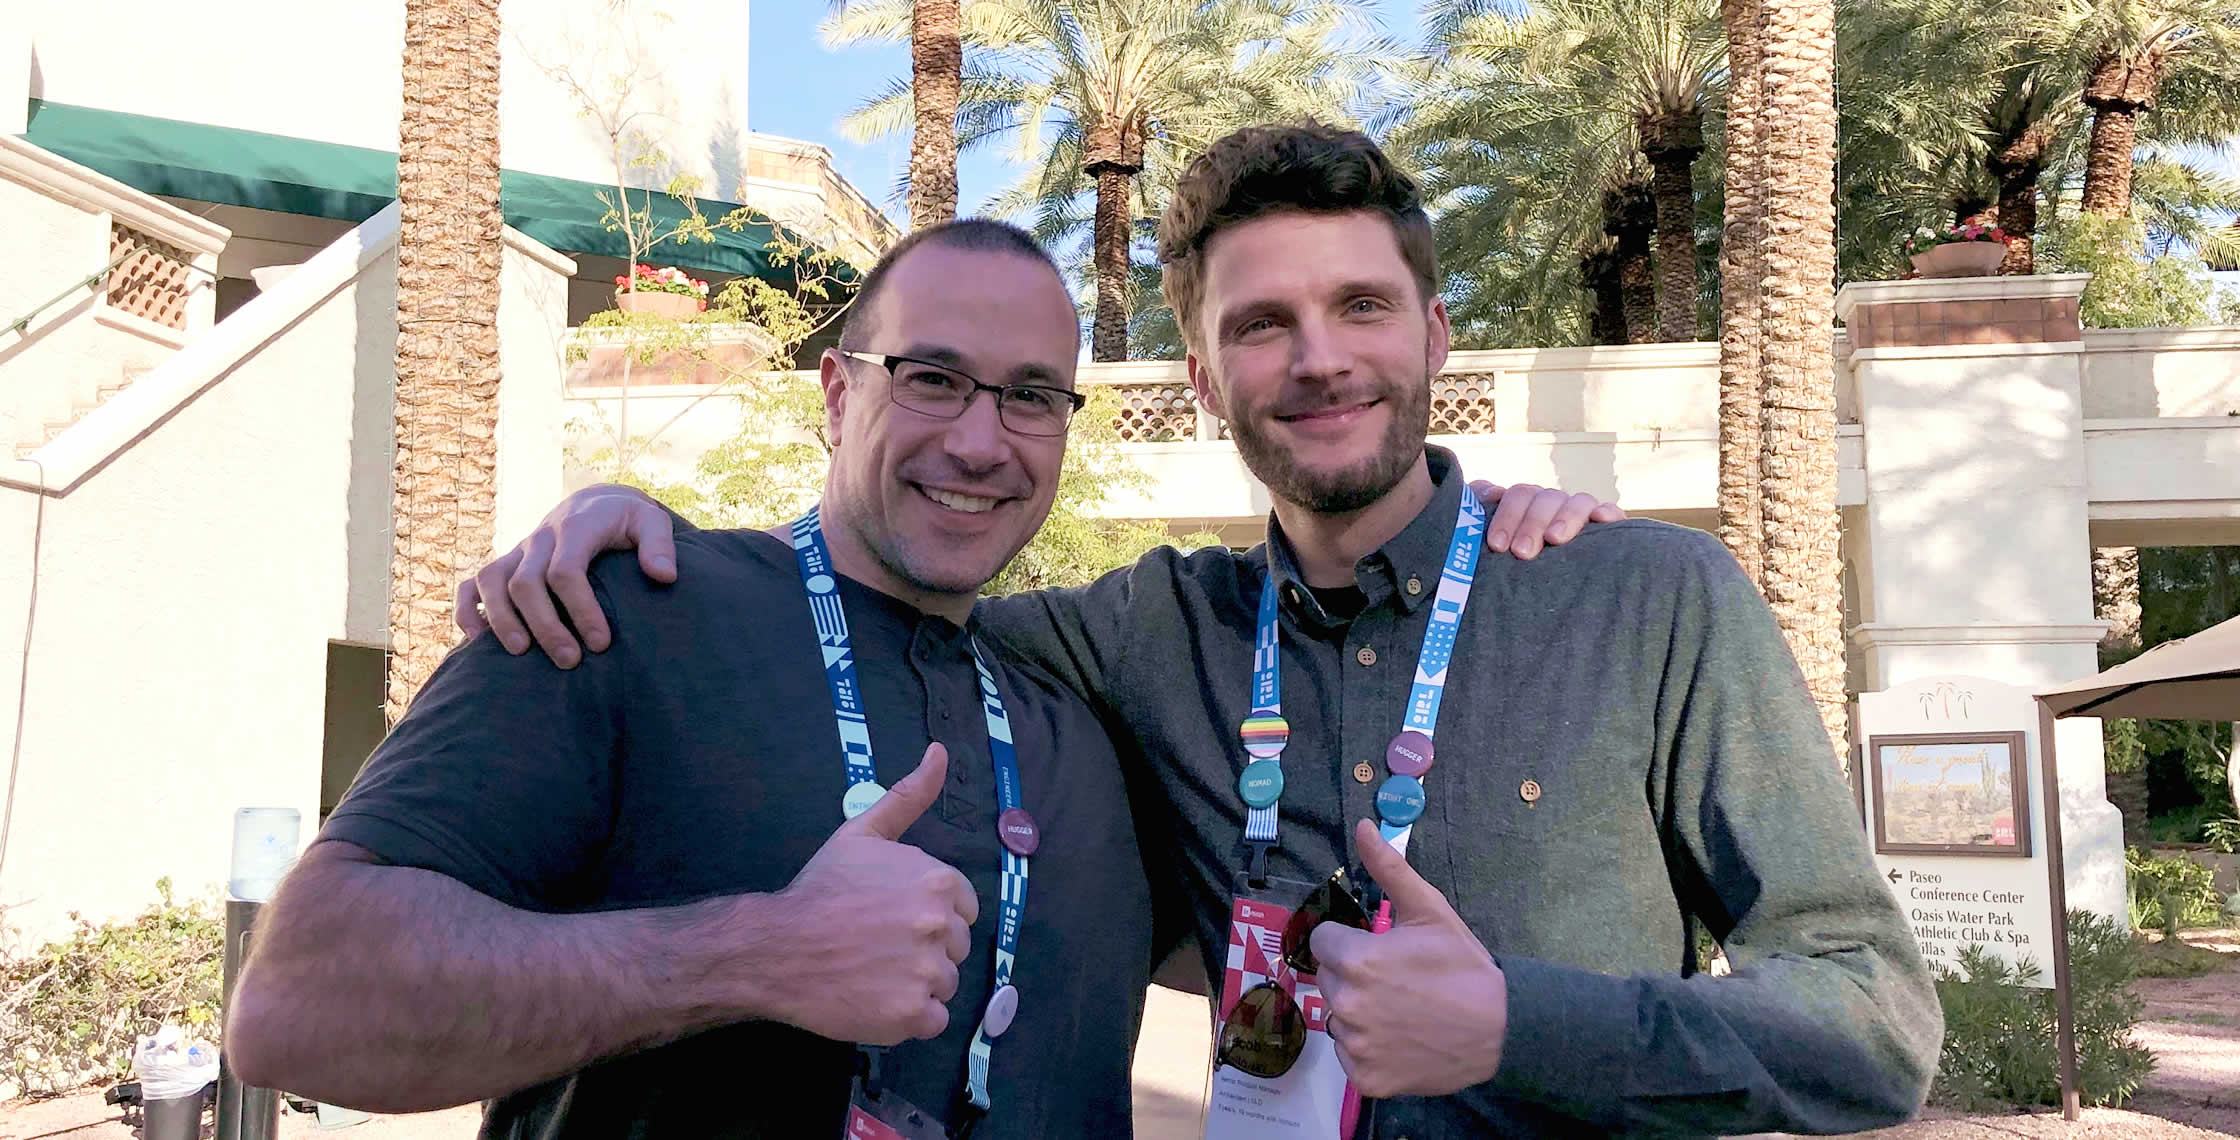 Ben Nadel at InVision In Real Life (IRL) 2019 (Phoenix, AZ) with: Jacob Holloway